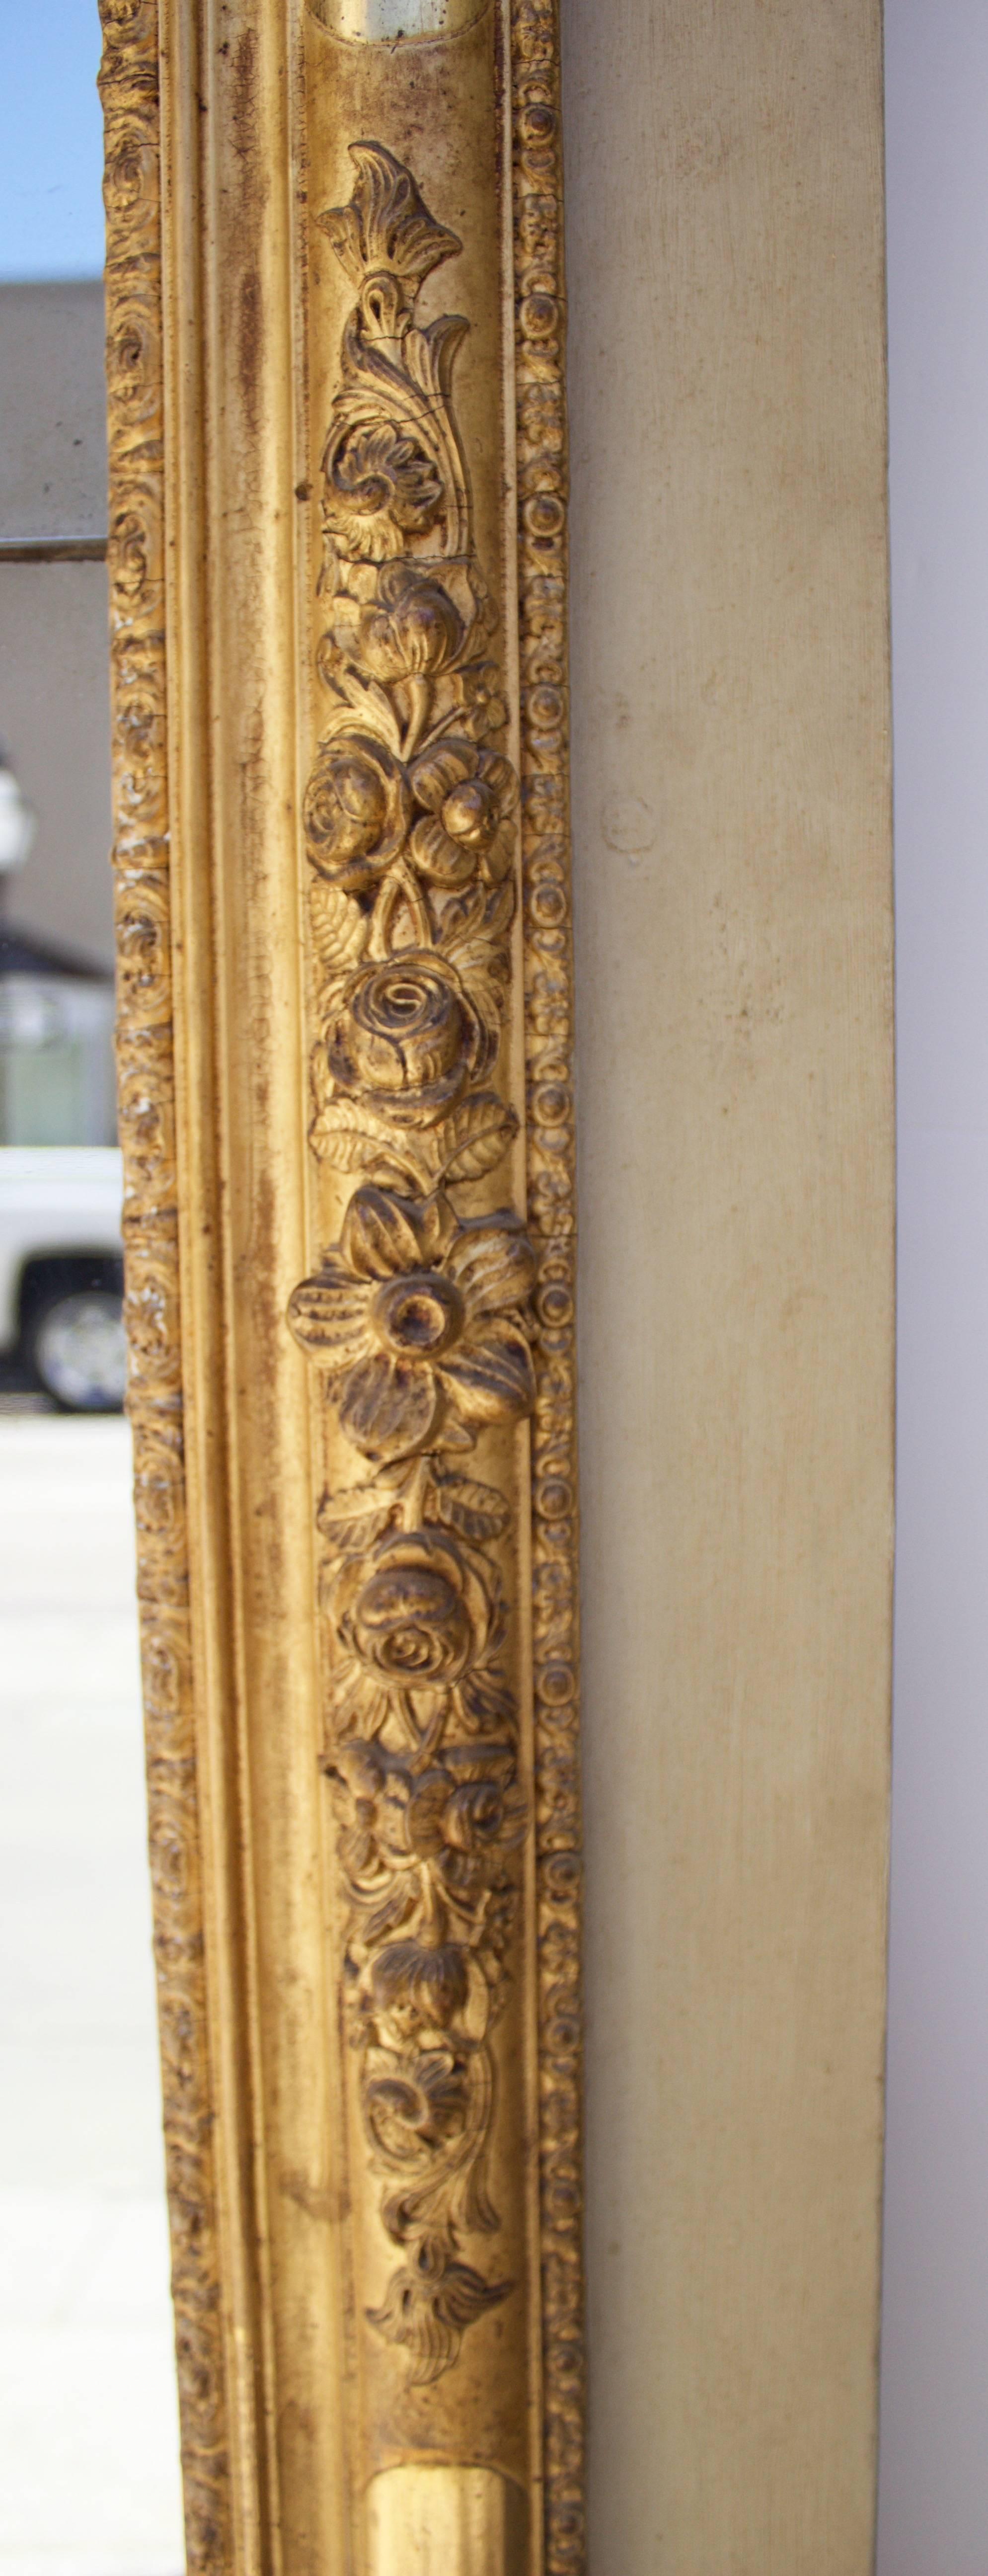 Gorgeous mirror frame adorned by in relief floral motifs in gilded carved wood and molded stucco. The entire trumeau in lacquered wood board with its top having a carved and gilded decor of a central flowers basket surrounded by a garland, flying